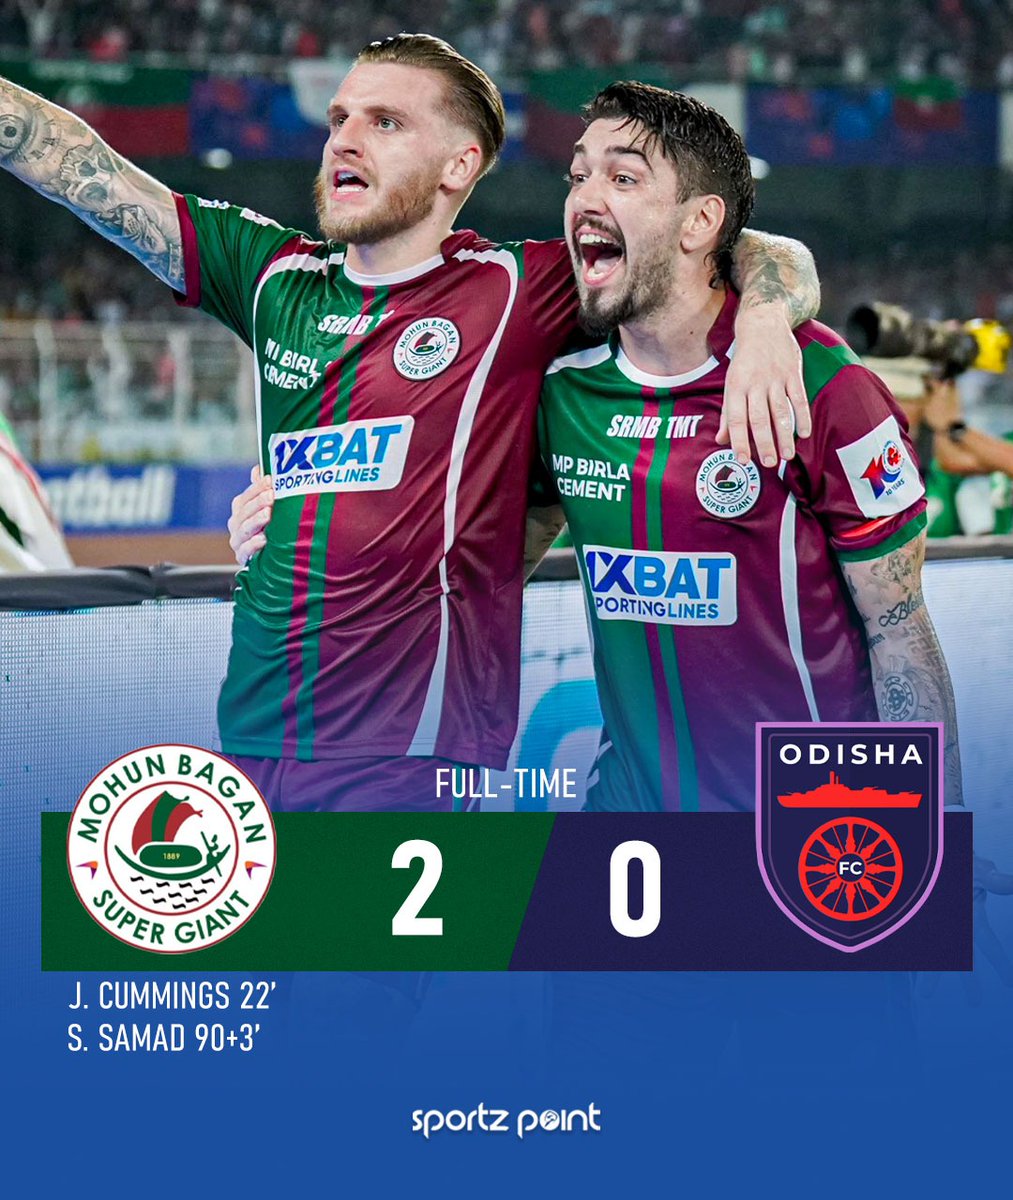 𝐅𝐓: 𝐌𝐁𝐒𝐆 𝟐 - 𝟎 𝐎𝐅𝐂 (𝐀𝐠𝐠 𝟑-𝟐)

MOHUN BAGAN HAS QUALIFIED FOR THE ISL FINALLLLLLLLL 😍💪💚❤️

#MohunBagan #MohunbaganSupergiants #ISL10 #ISL2024 #MBSG #MBSGOFC